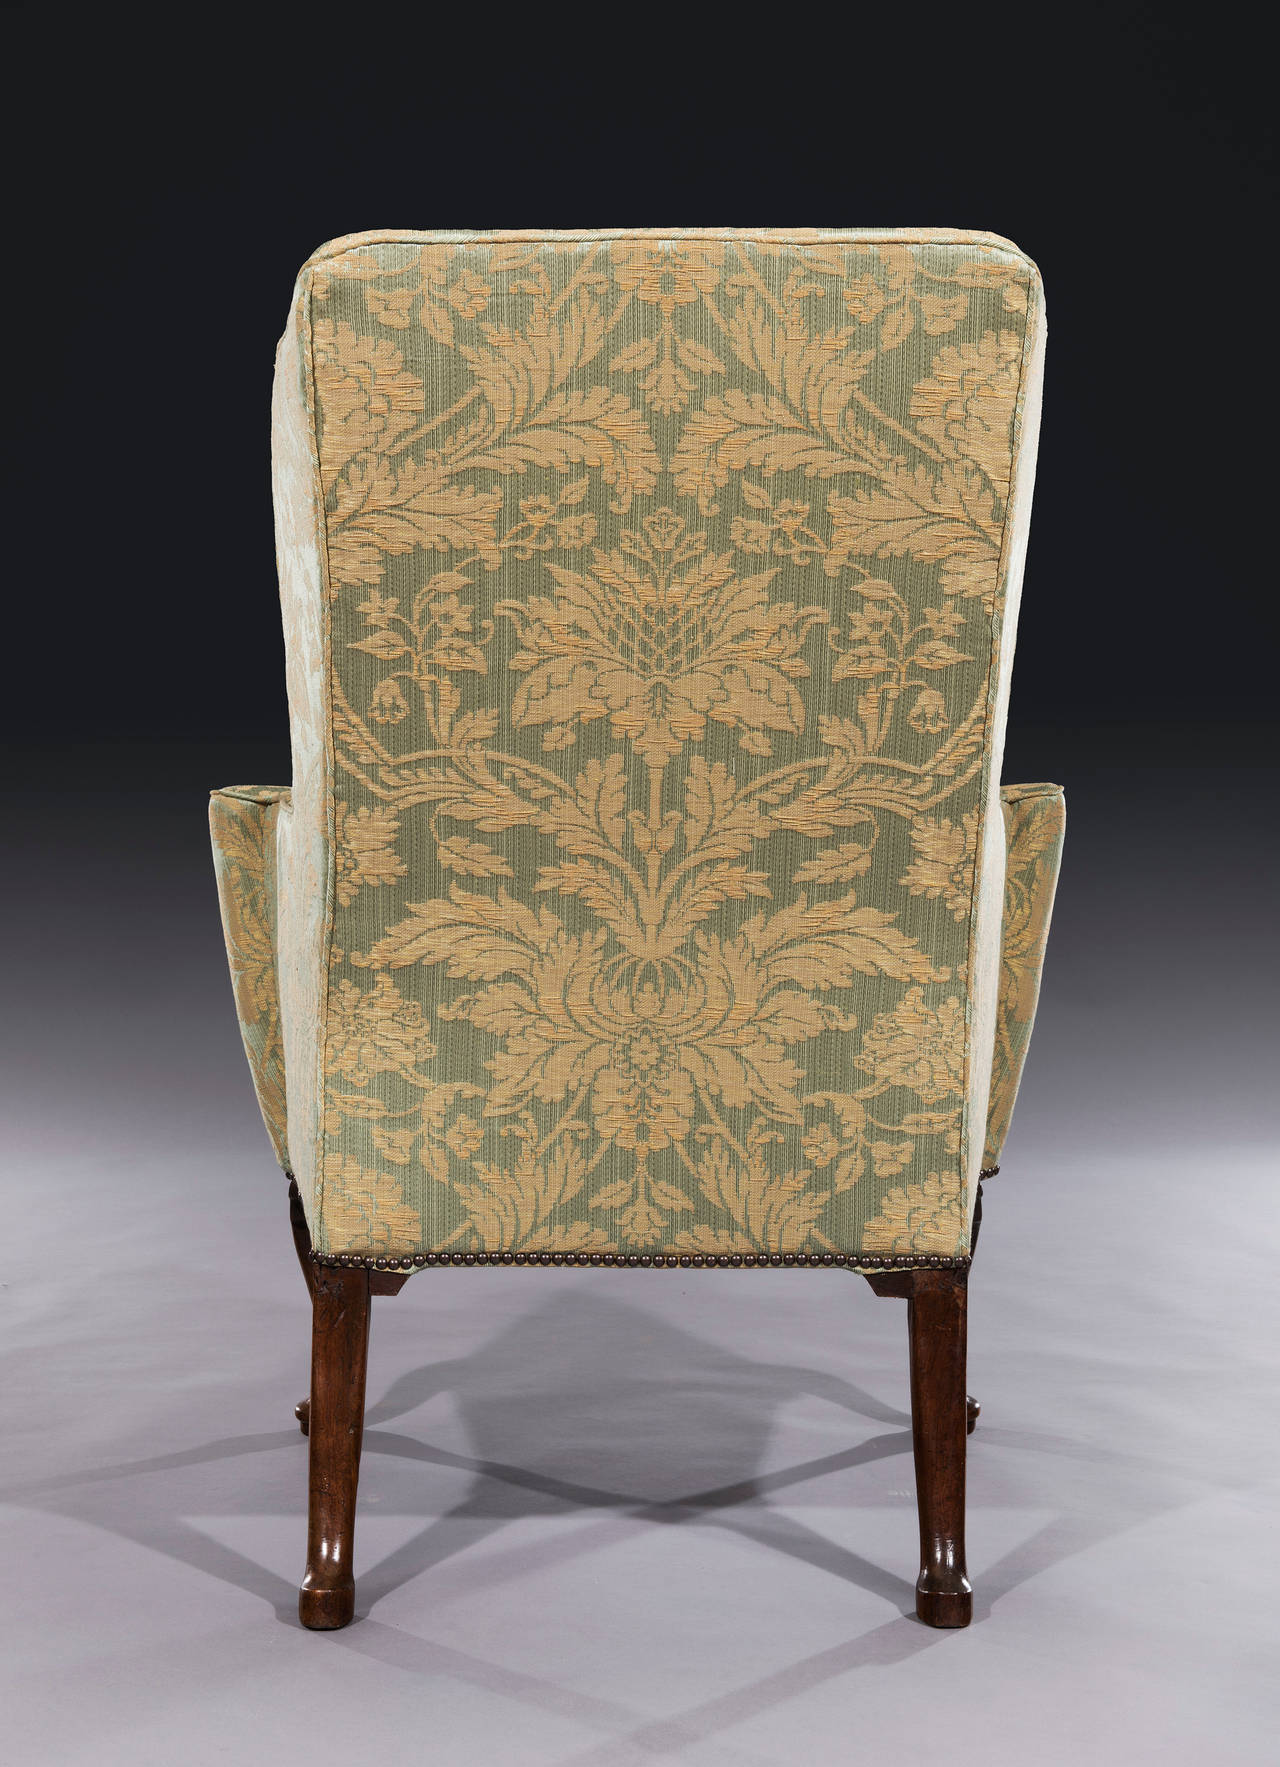 The winged back armchair has a tall backrest and shaped sides scrolling down seamlessly to out-scrolled arms on a bow-fronted seat and stands on original cabriole front legs and outswept back legs.